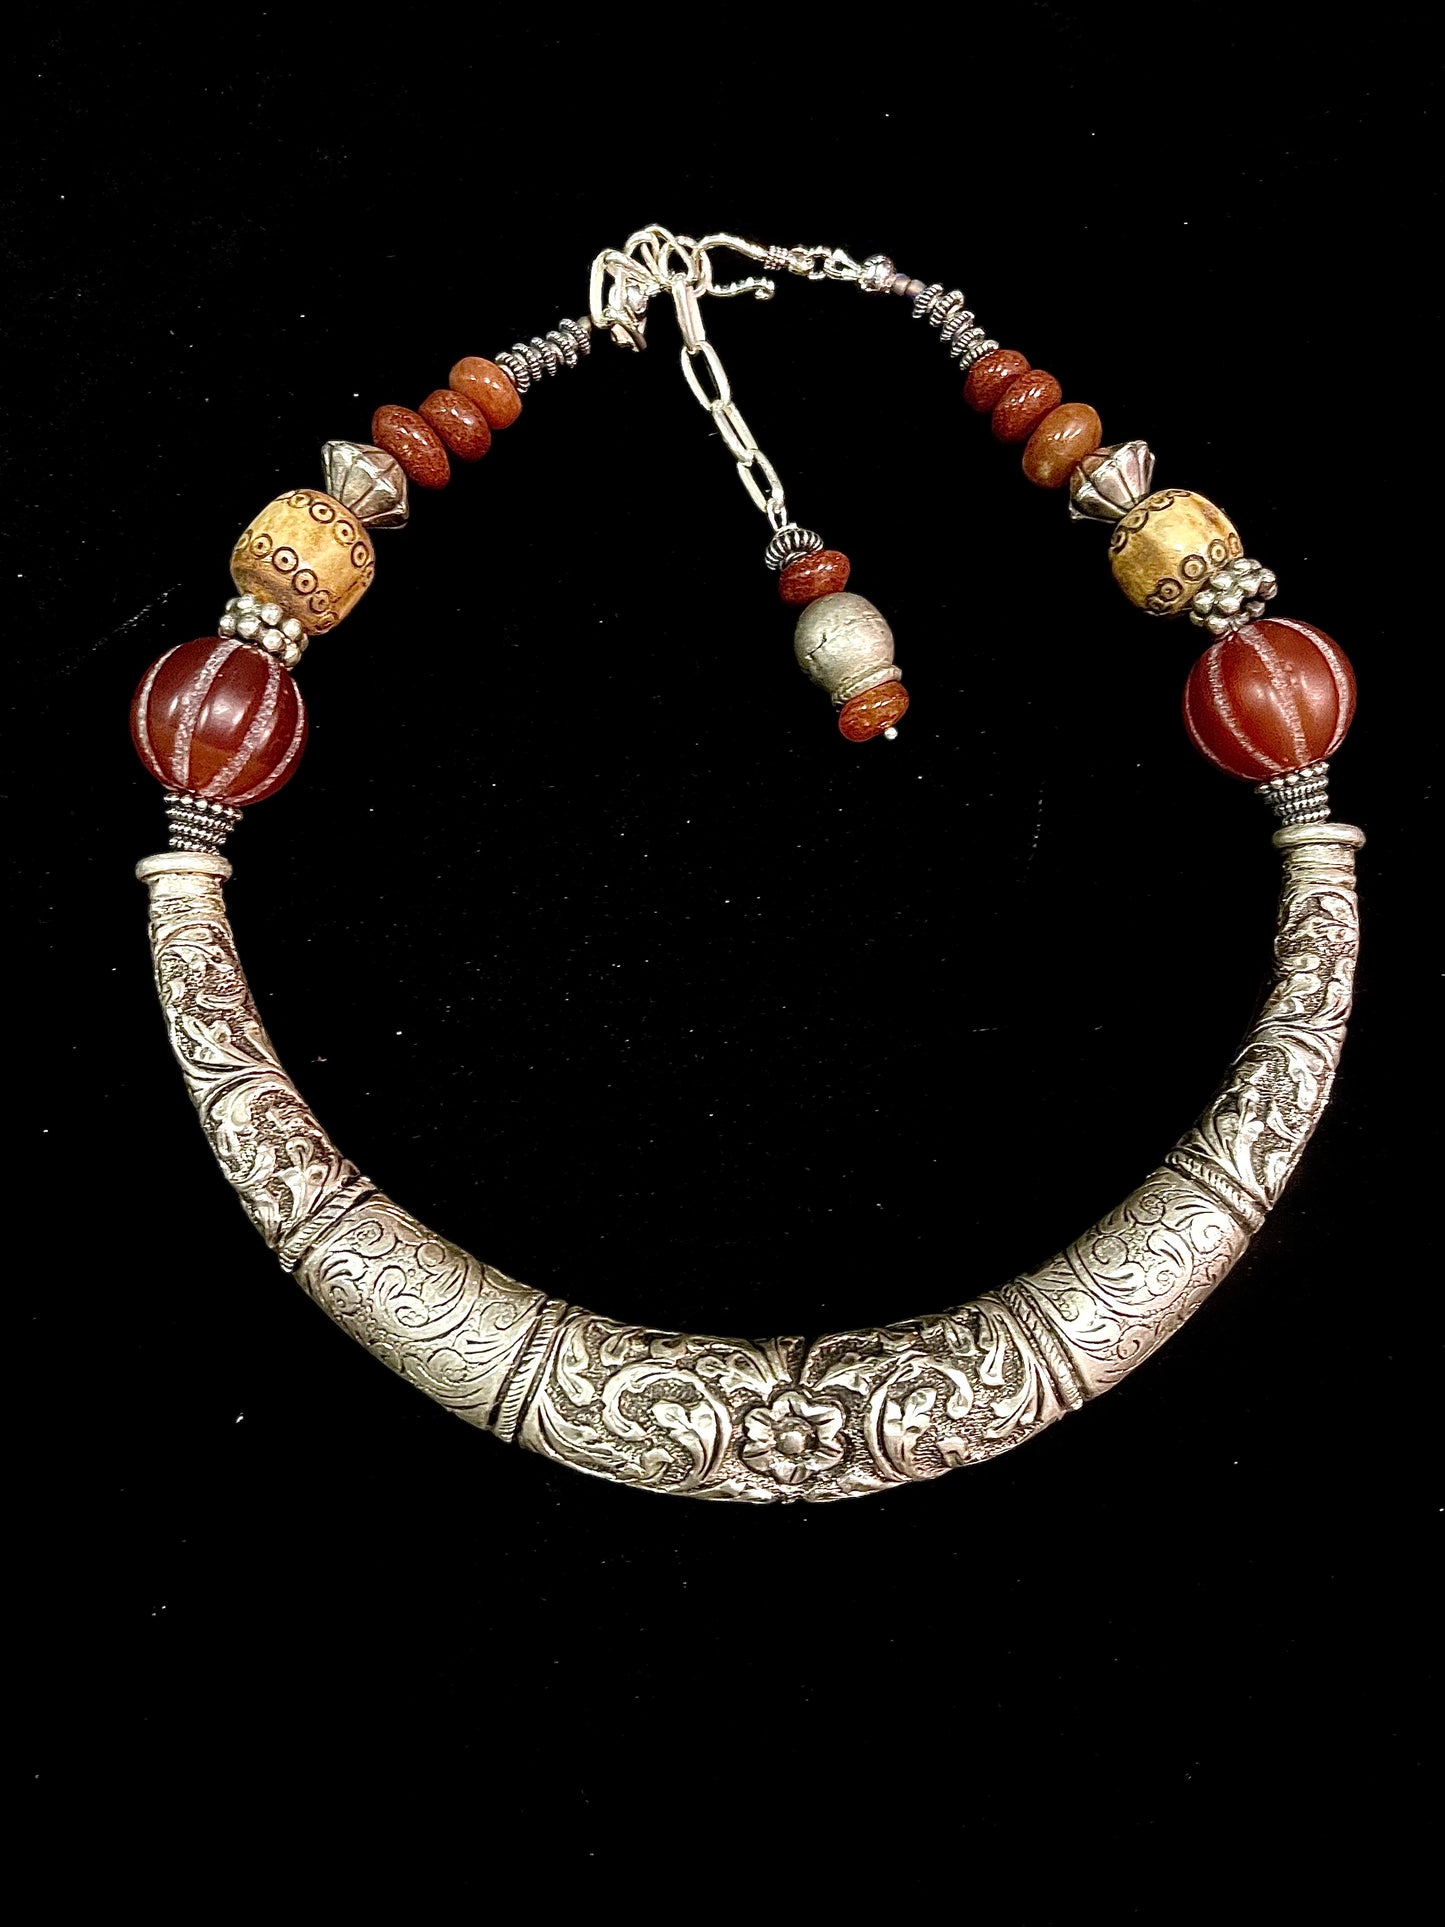 Silver torque necklace from Rajasthan India